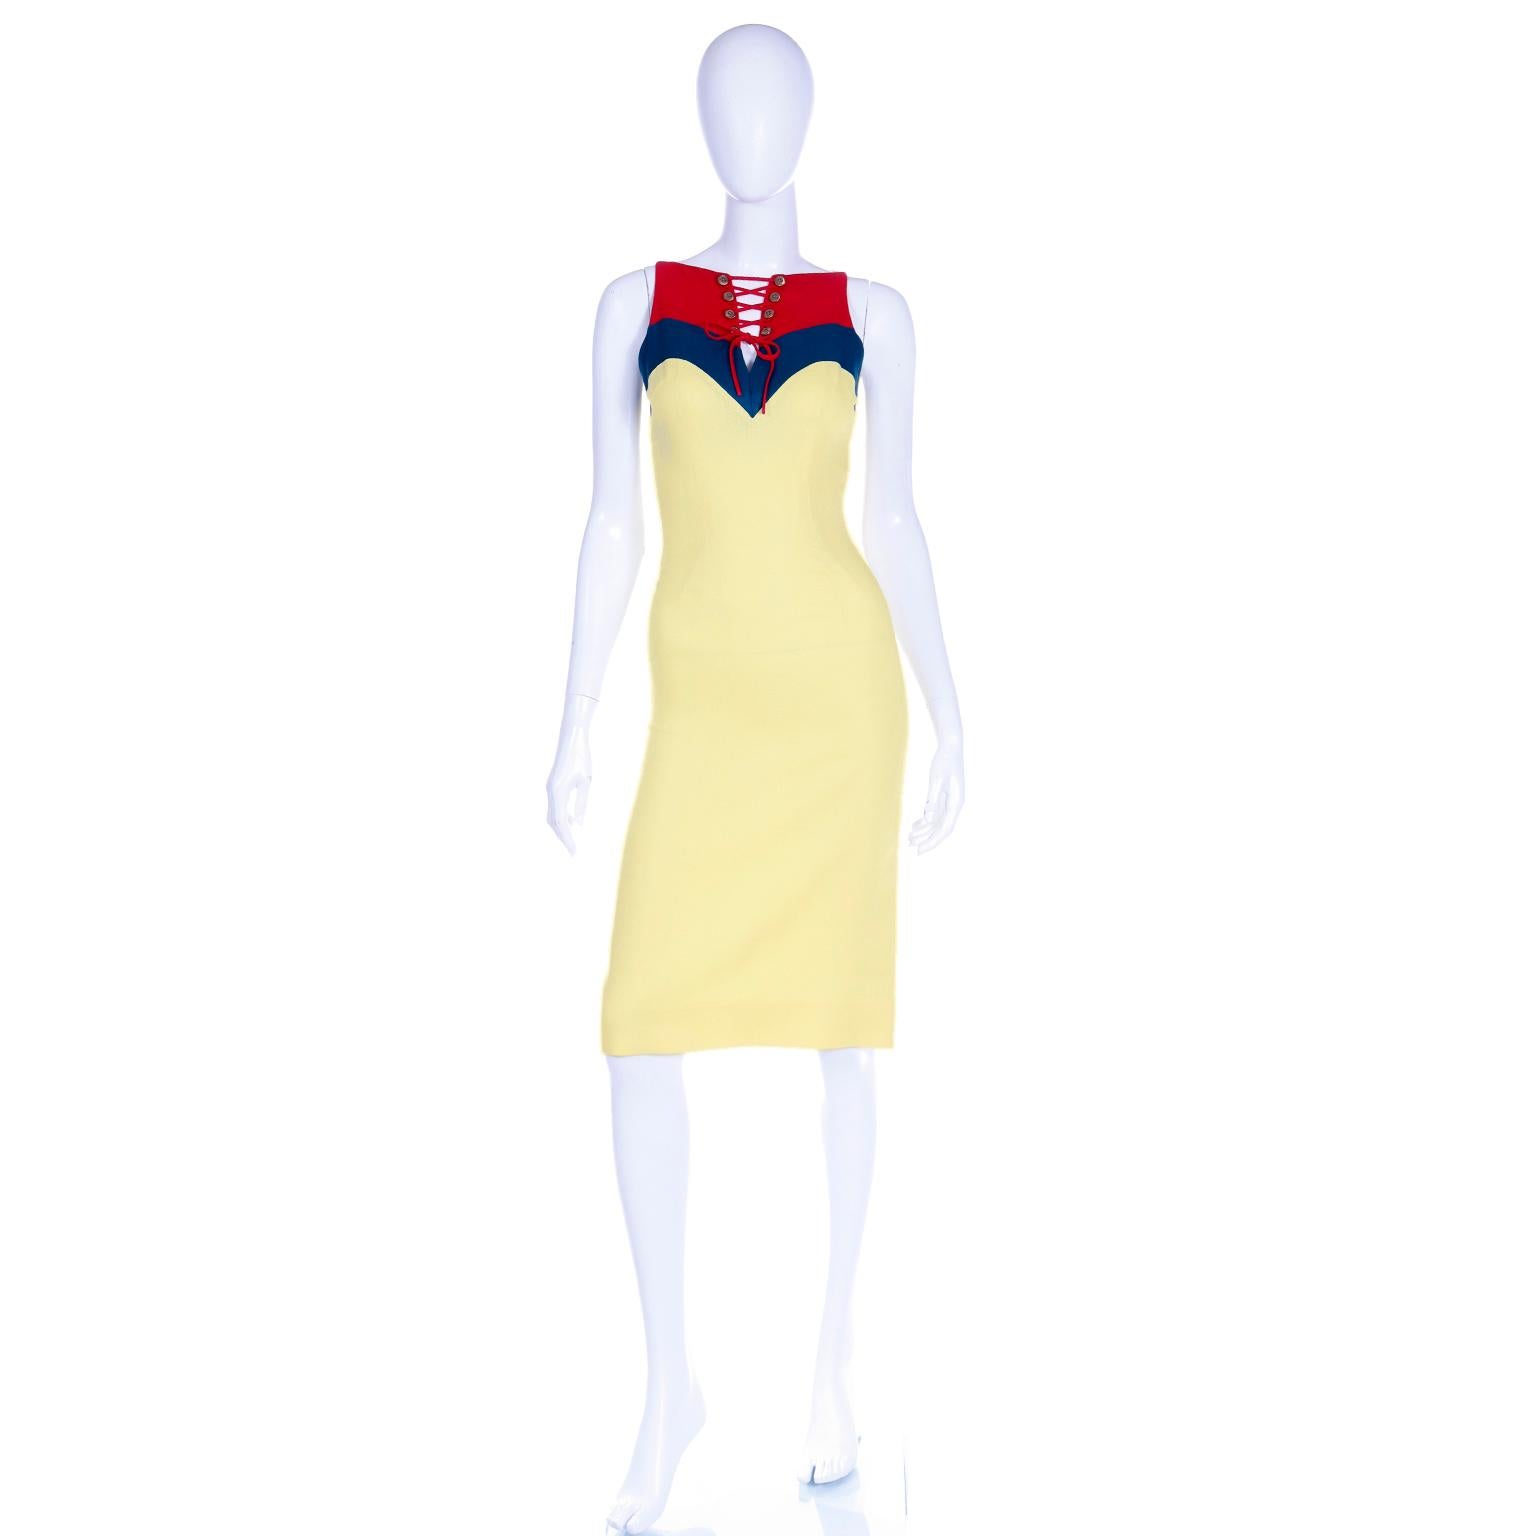 This is a fabulous vintage Oleg Cassini sleeveless linen sheath dress in yellow with a red and green corset tied bodice. We fell in love with this dress because it is such a great summer day dress and it has so many great details. We love the